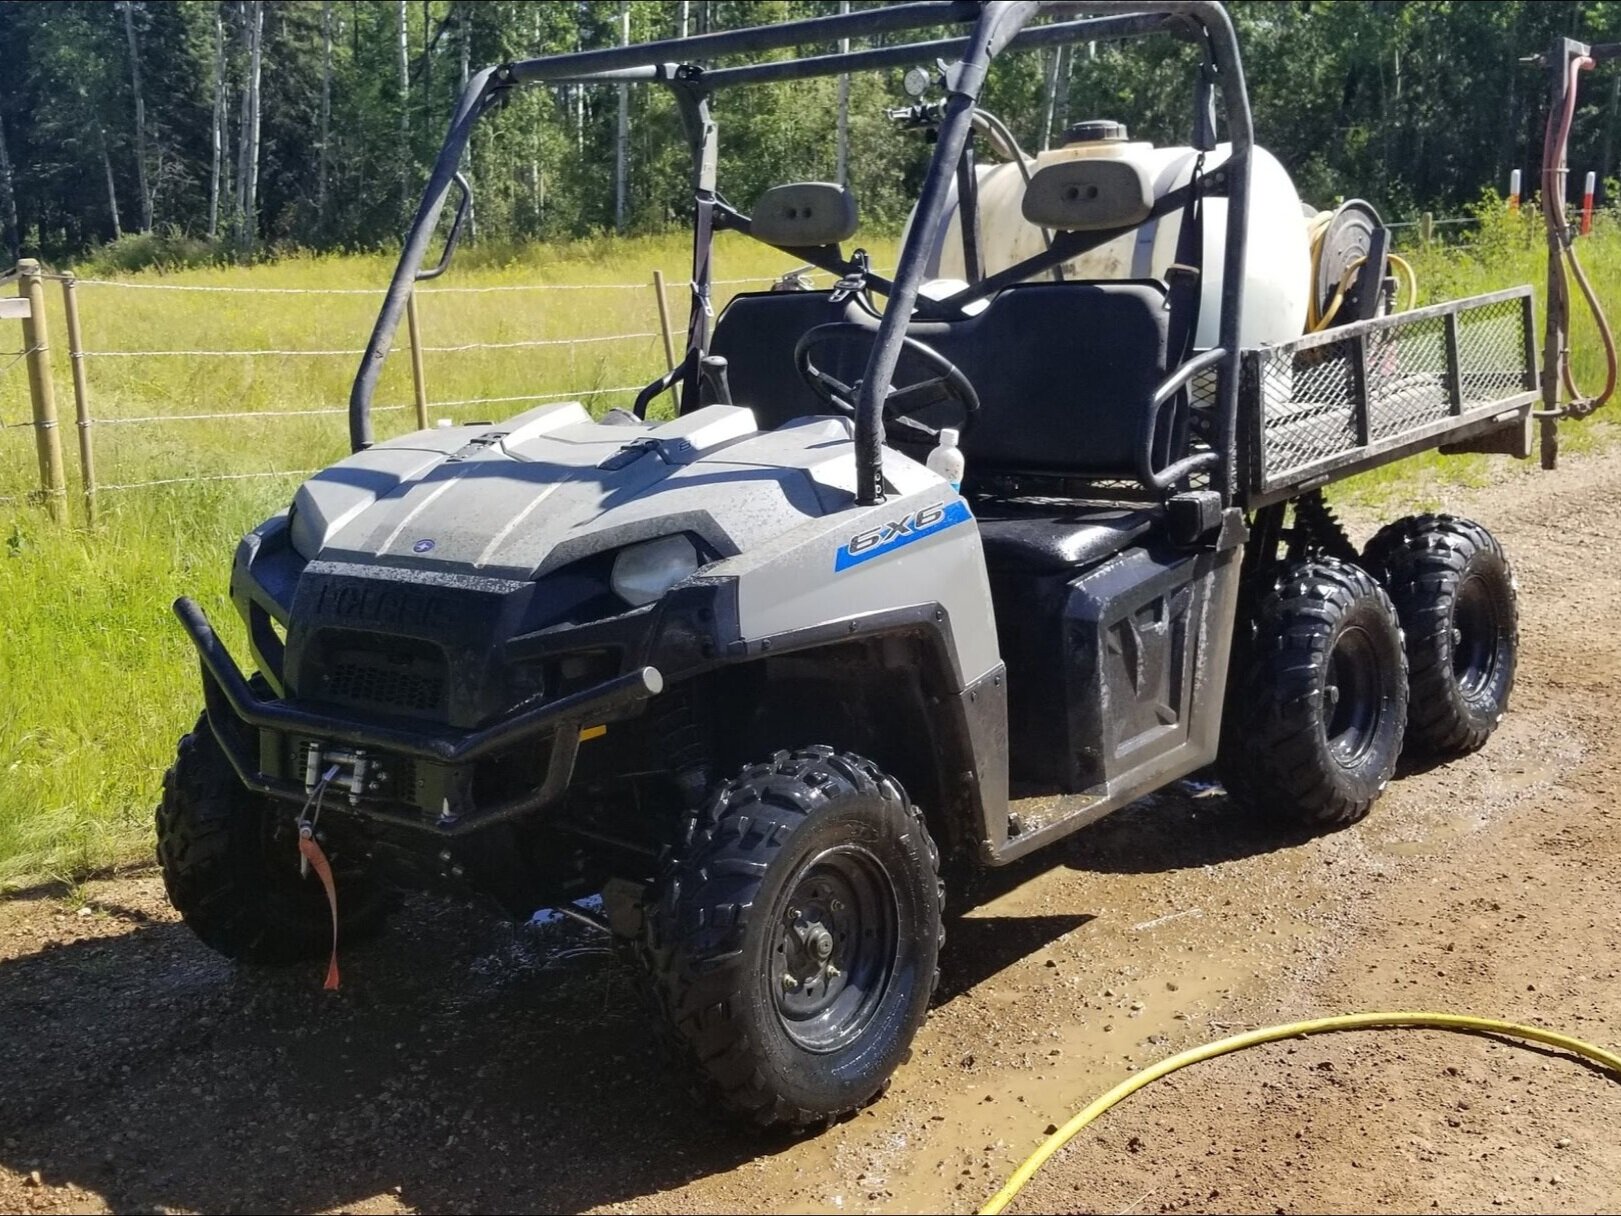 UTV Ready for Weed Control